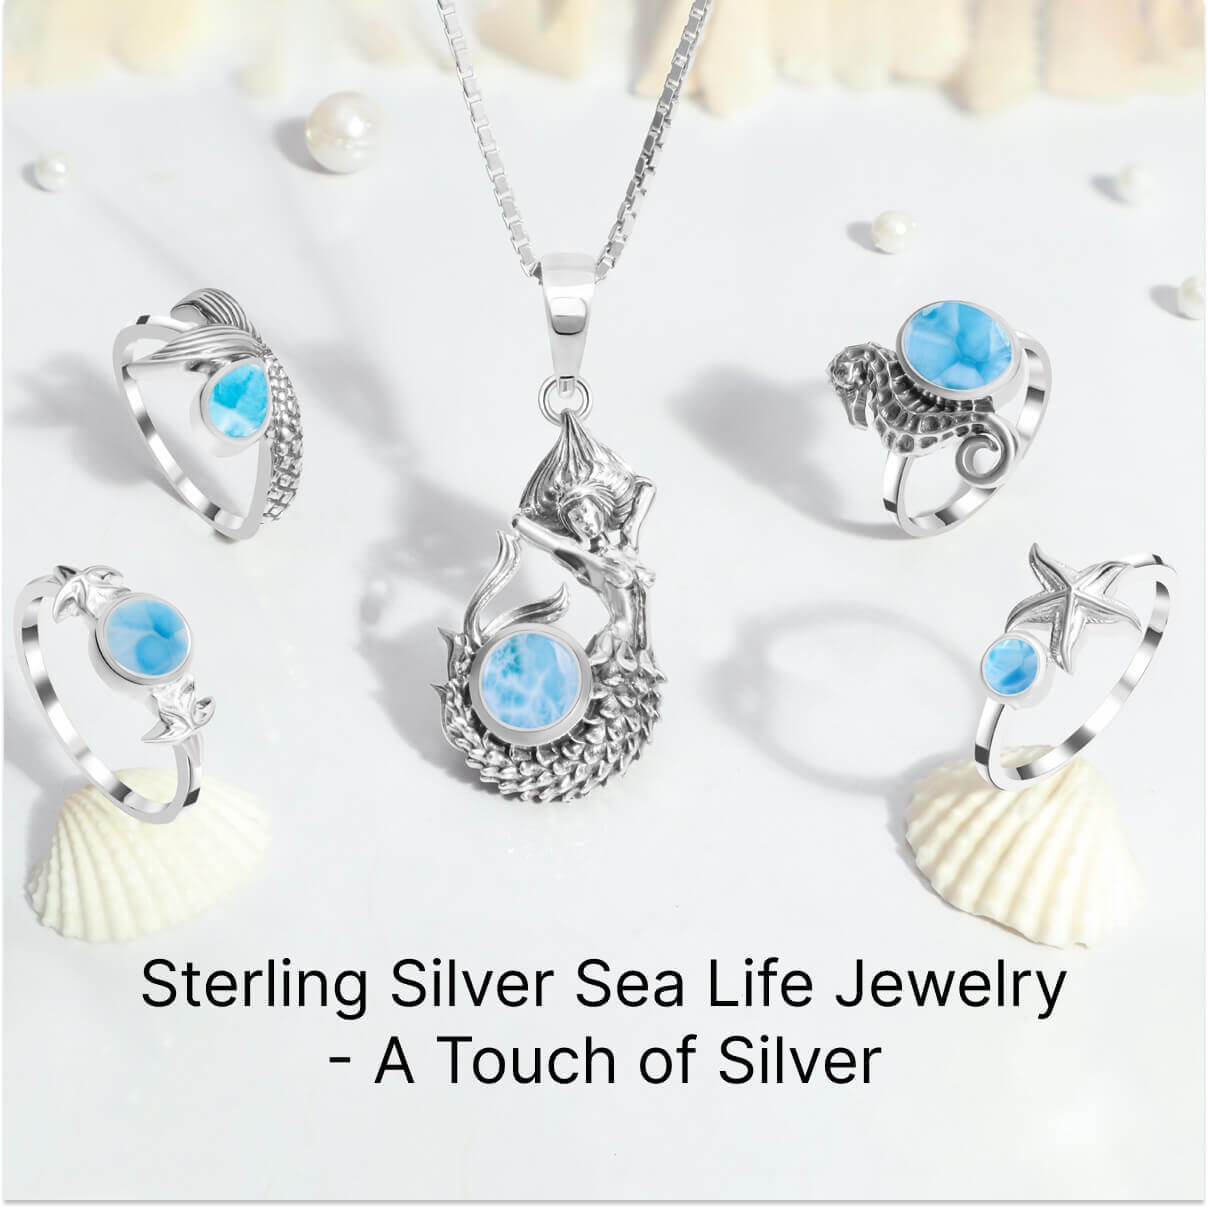 Silver Sea Life Jewelry Casual Outfits